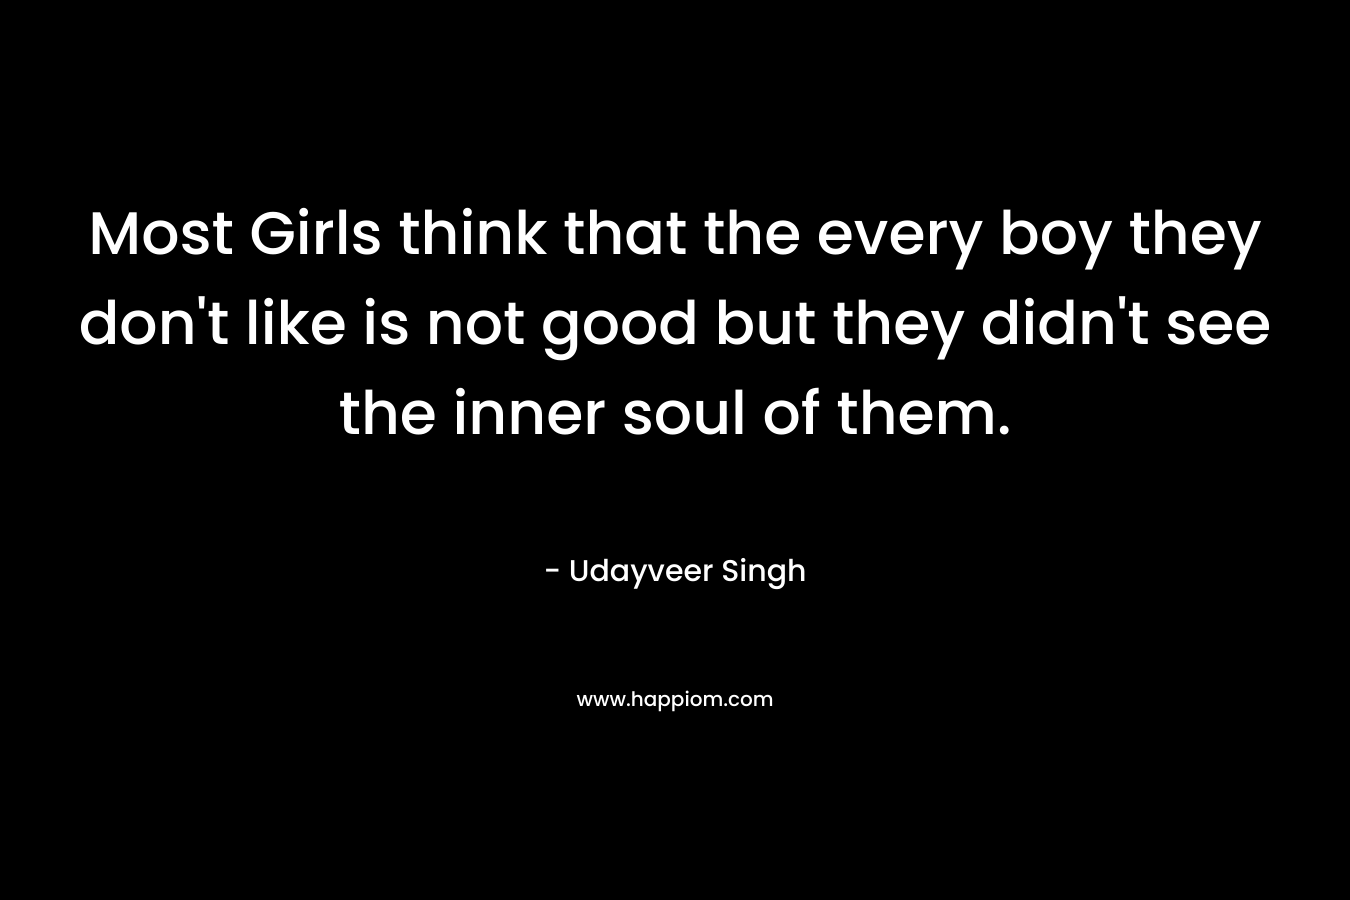 Most Girls think that the every boy they don't like is not good but they didn't see the inner soul of them.